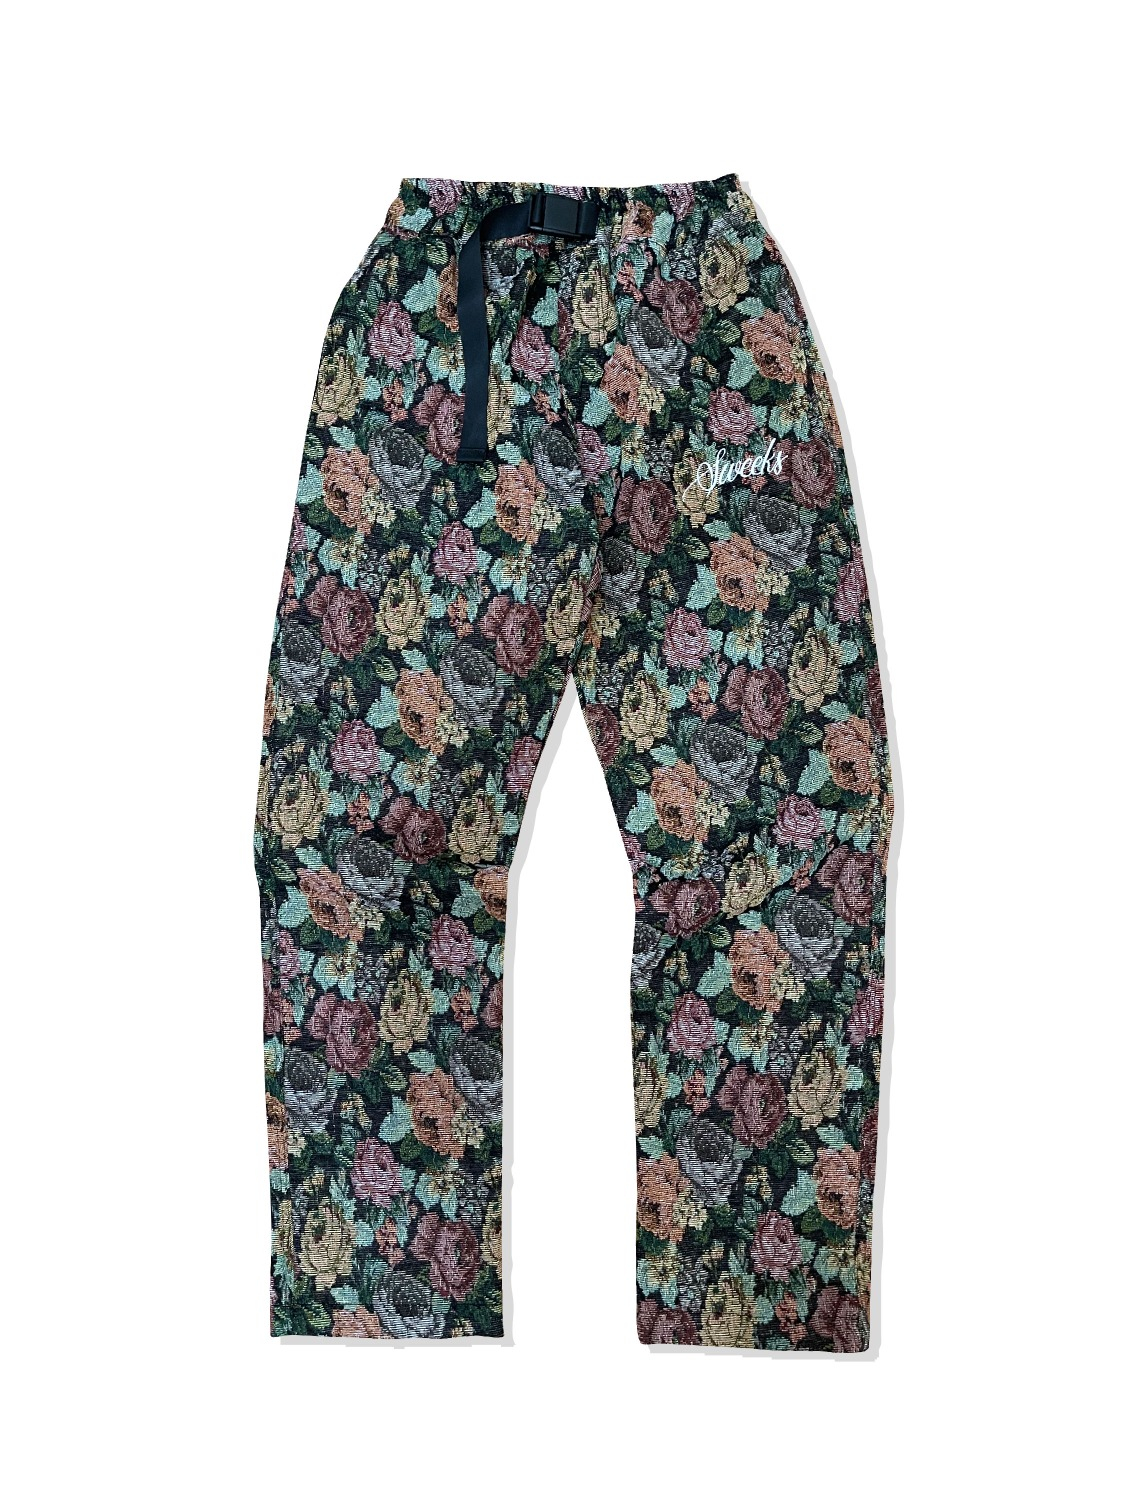 SW Floral Pants (Night)